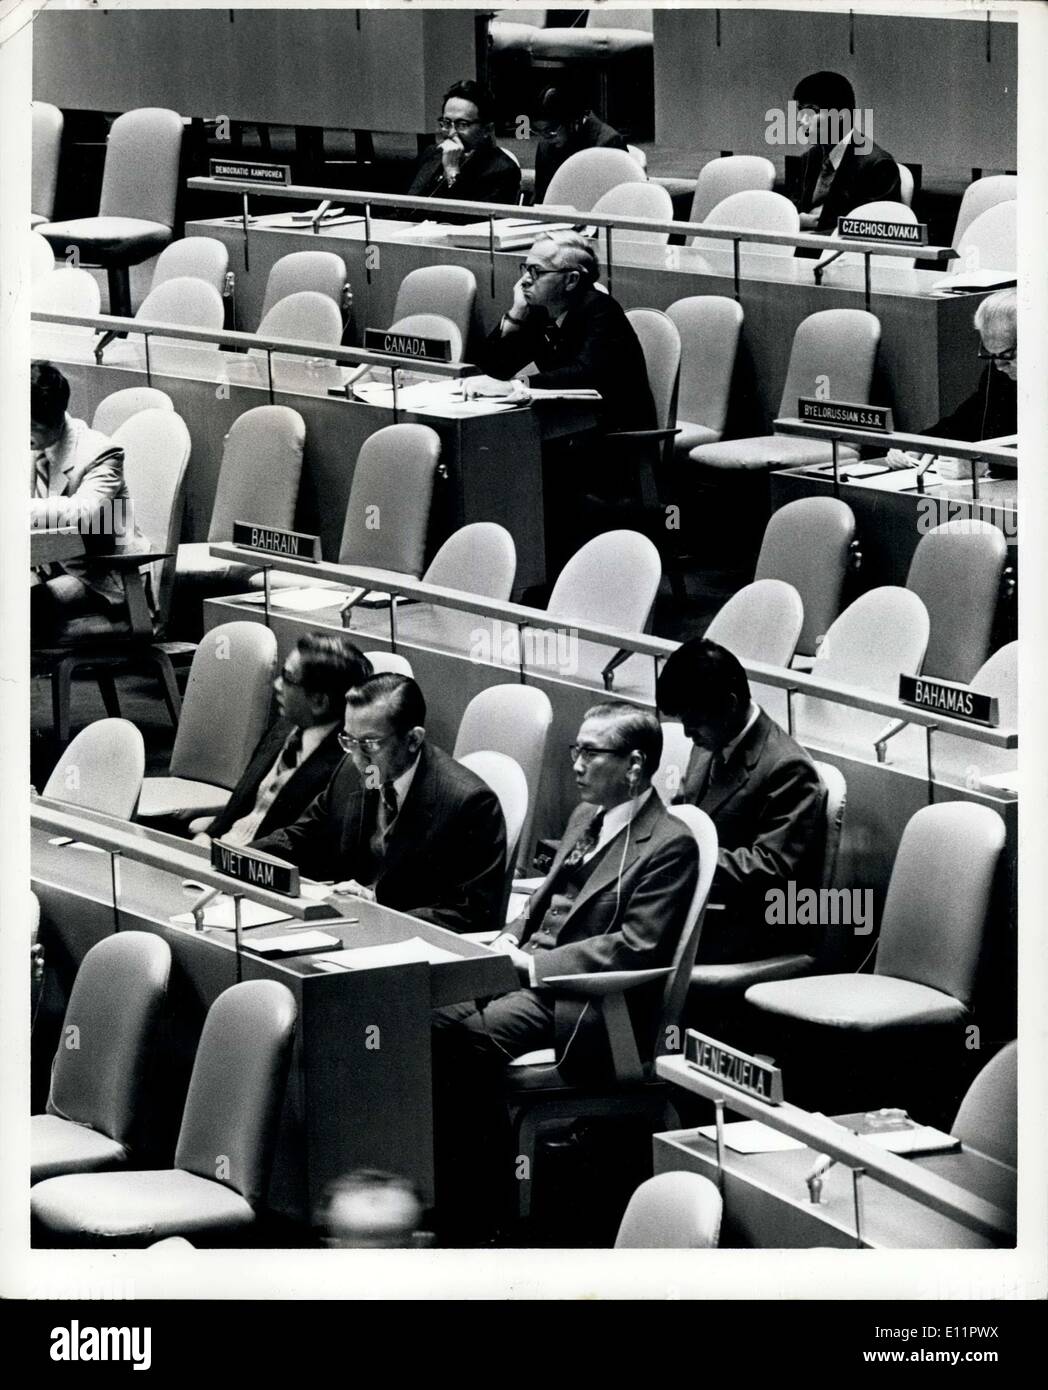 Dec. 11, 1979 - The United Nations, New York, N.Y.: The United Nations began a debate on democratic kampuchea today. Photo shows Foreground Vietnam deligation with Perm. Rep. Ha Van Lau, BKGD. DEM. Kapuchea deligation with thioum prasith permanent rep. Stock Photo